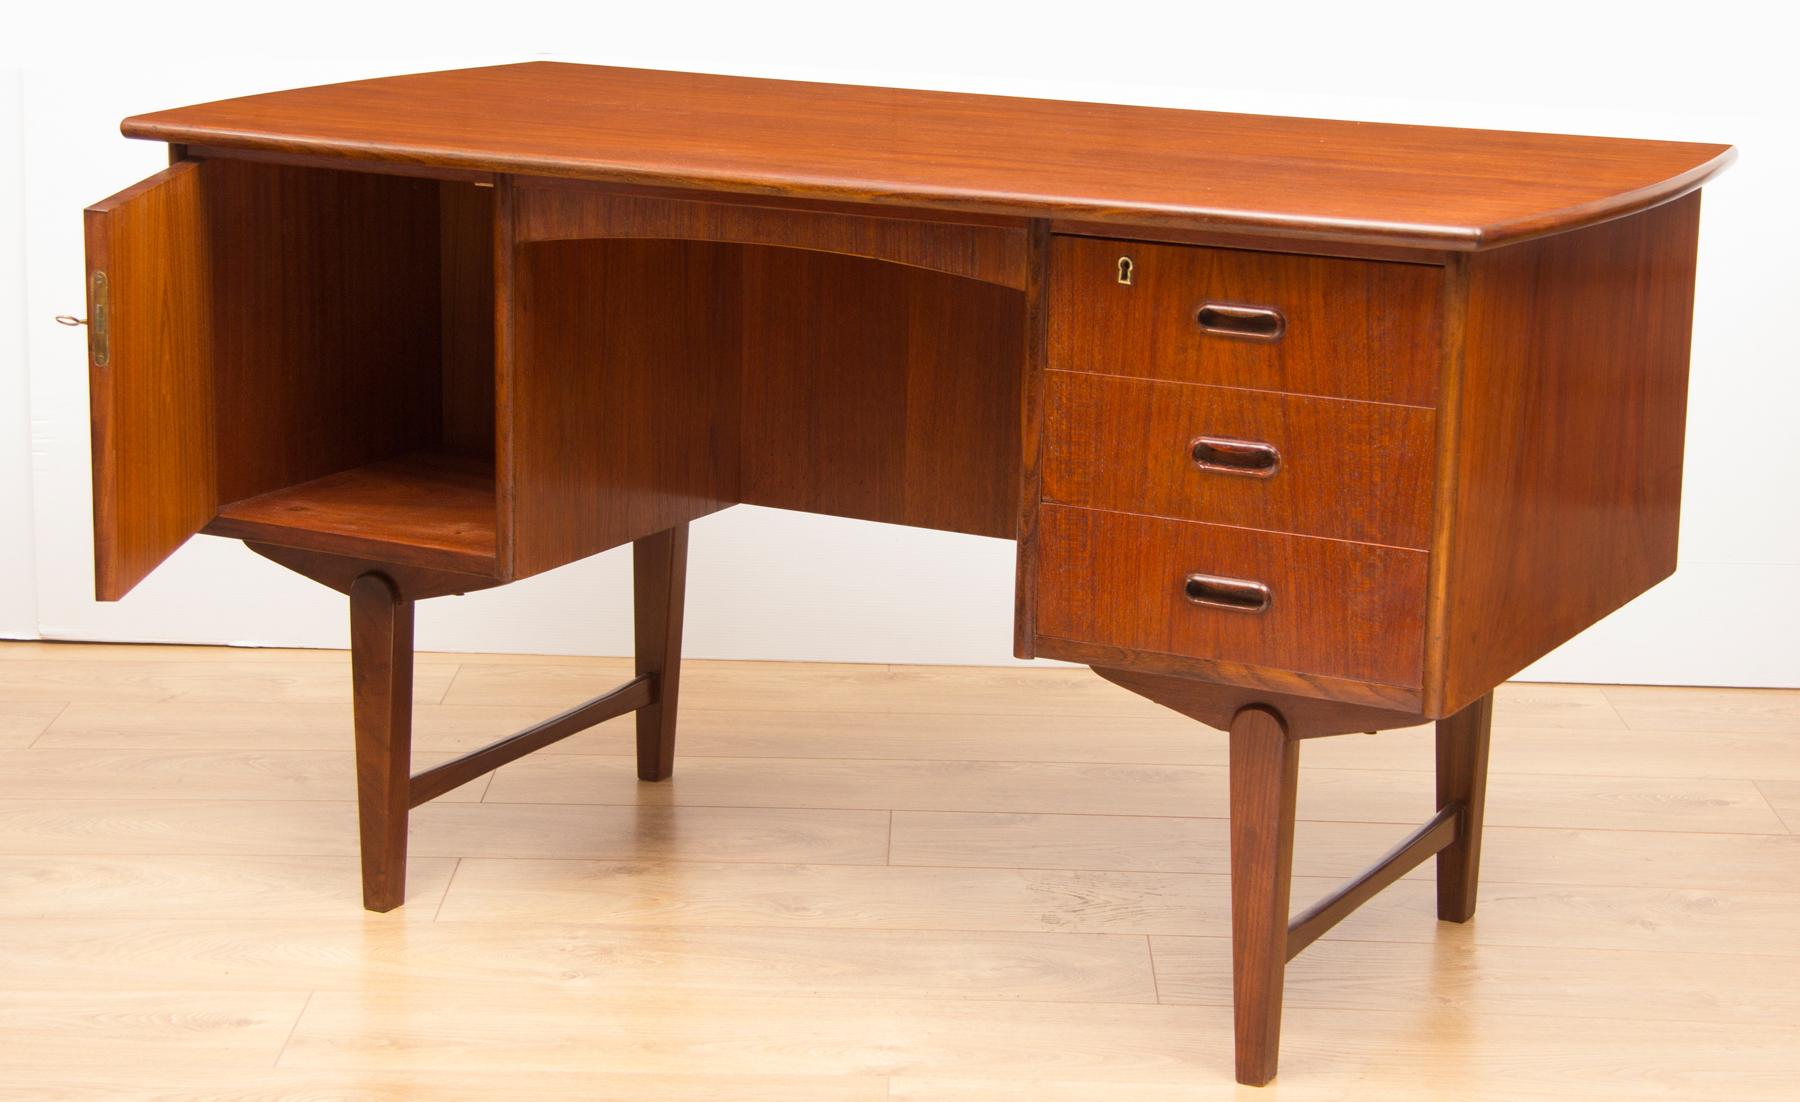 Midcentury teak desk, circa 1960.Featuring drawers and a door to the front and a bookshelf and drop down cabinet to the rear.